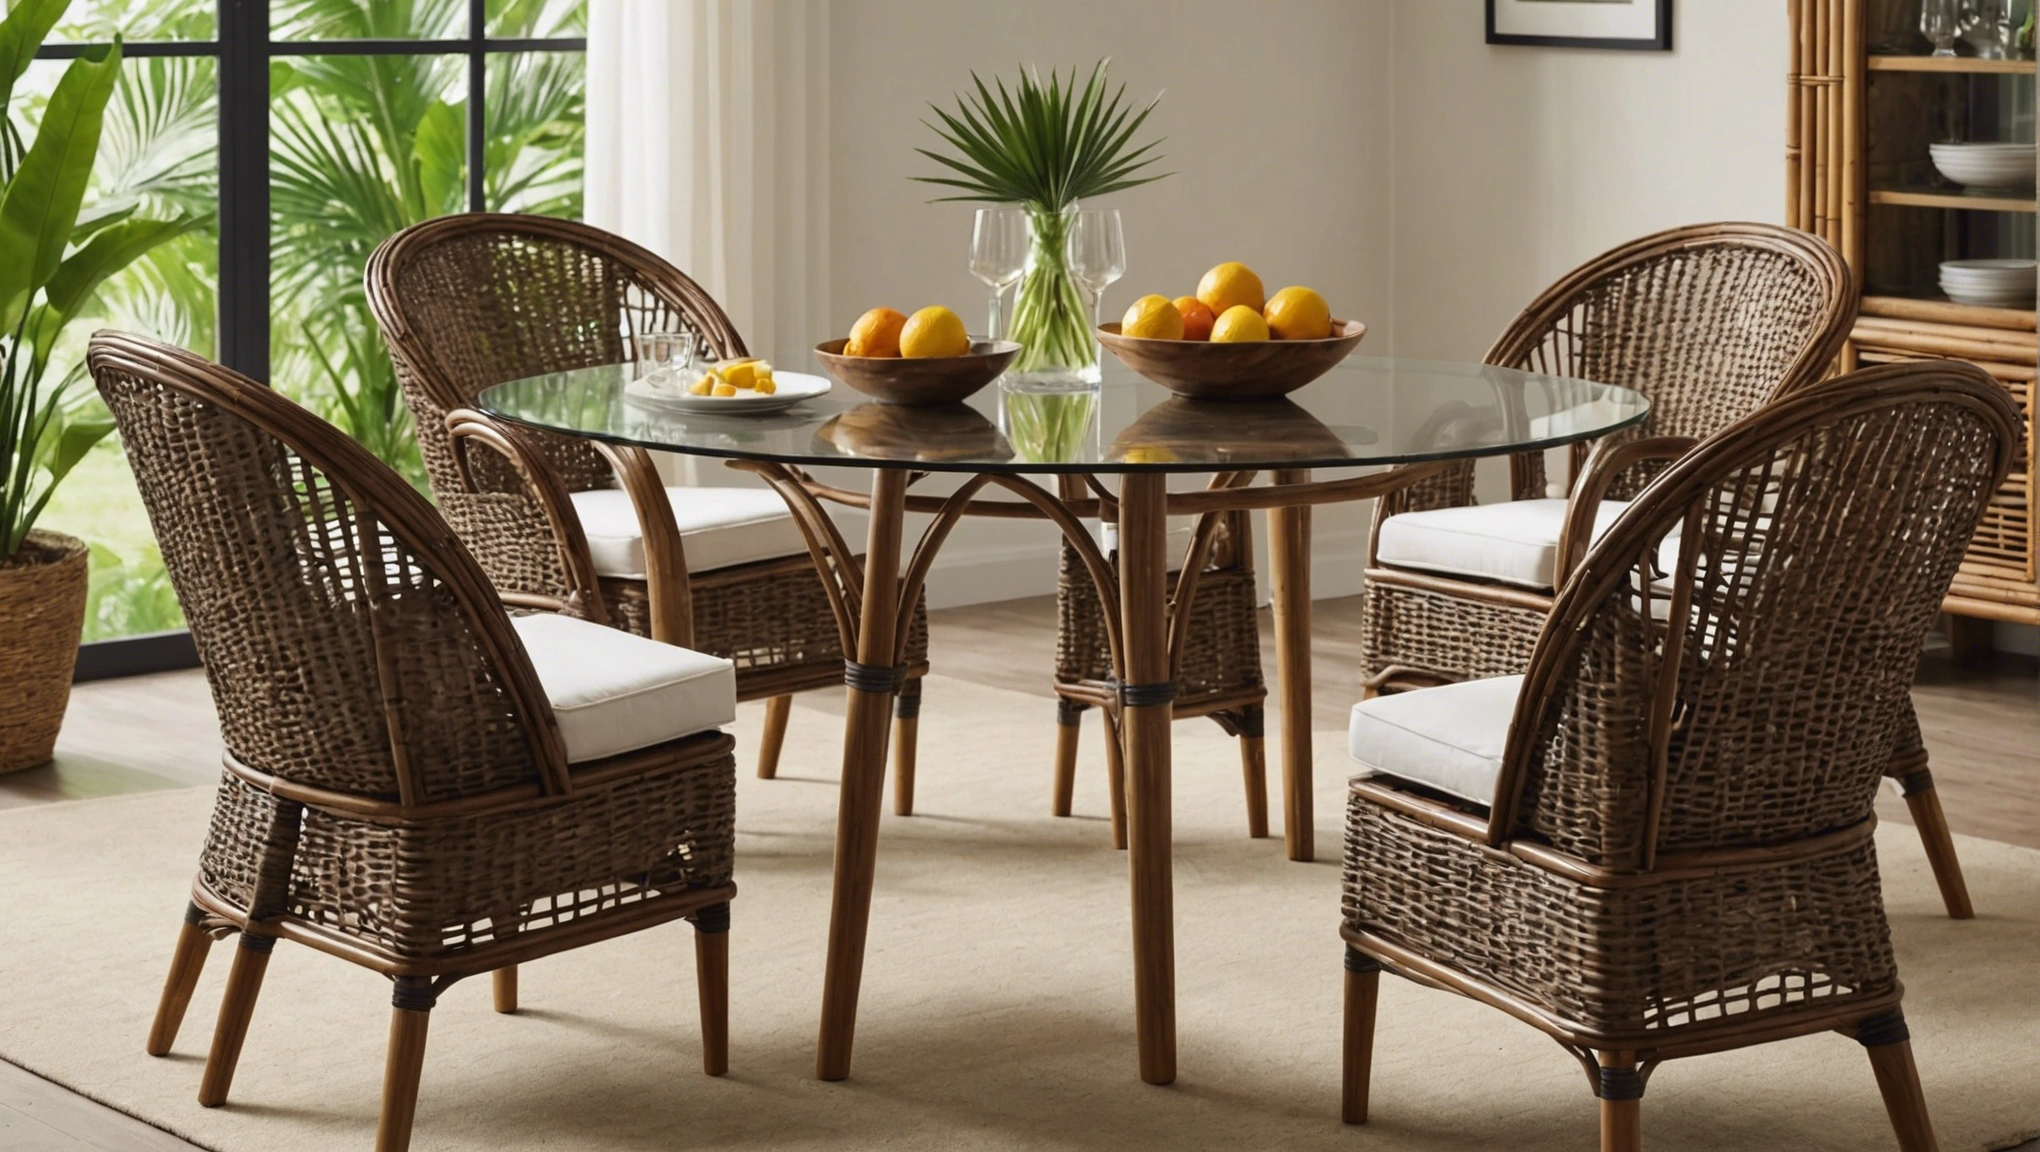 7 Stylish Rattan Dining Chairs for a Tropical Touch